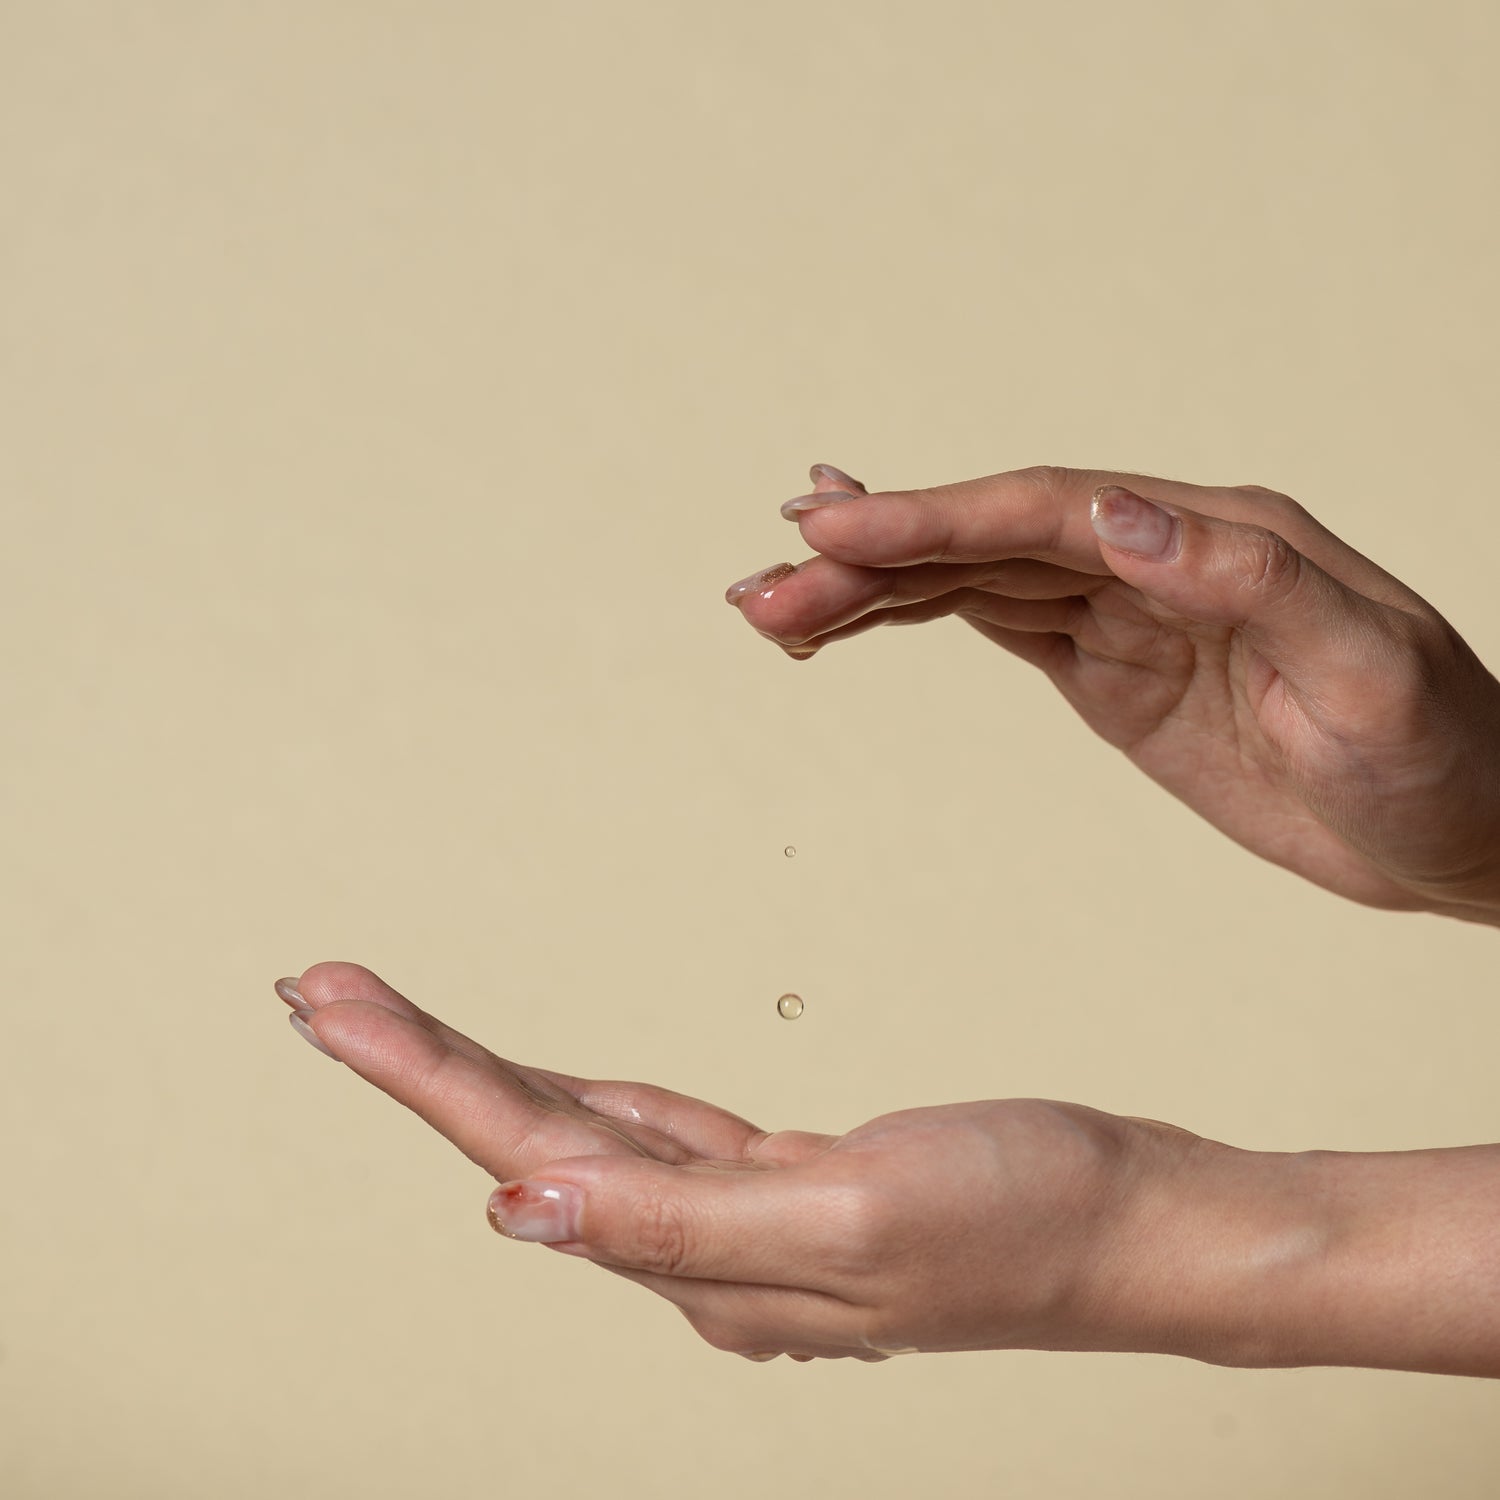 Essential Oil suspends in air with hands.